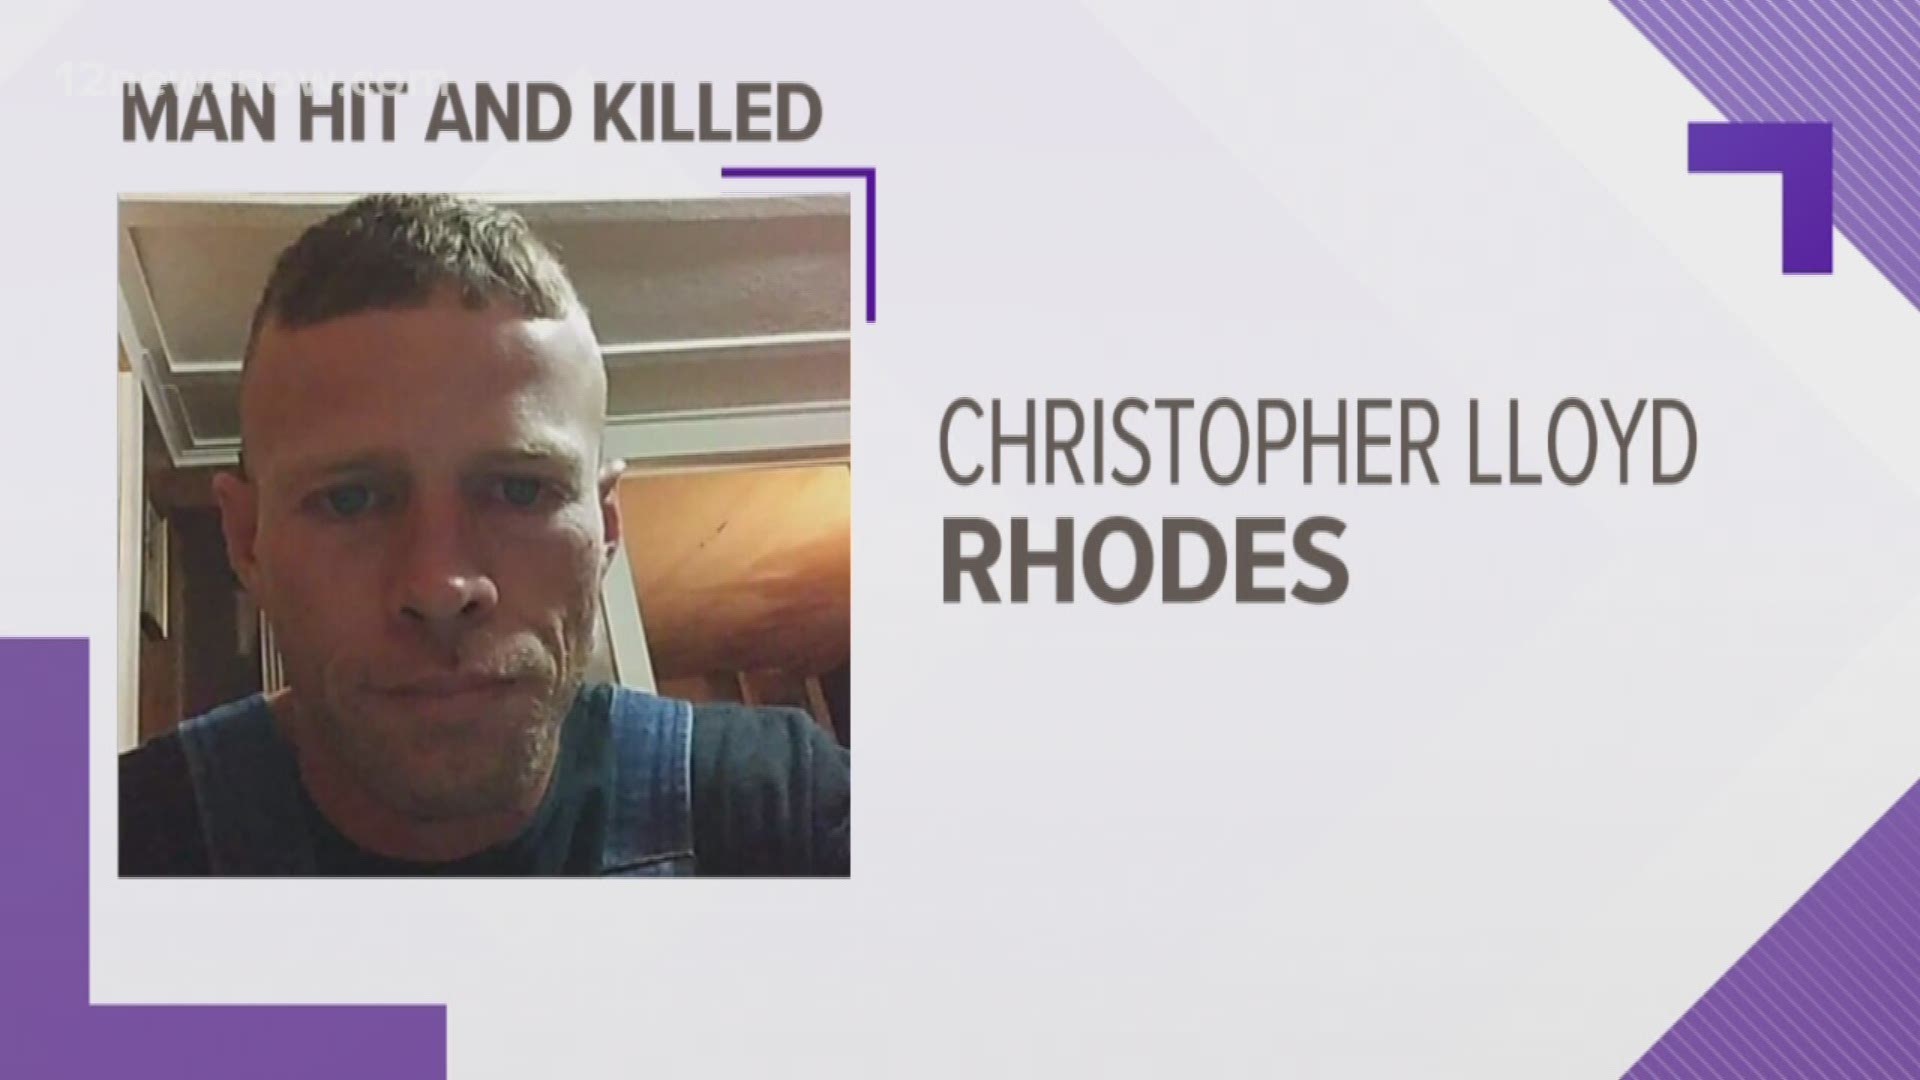 Christopher Lloyd Rhodes died around 6 Sunday morning according to family members.